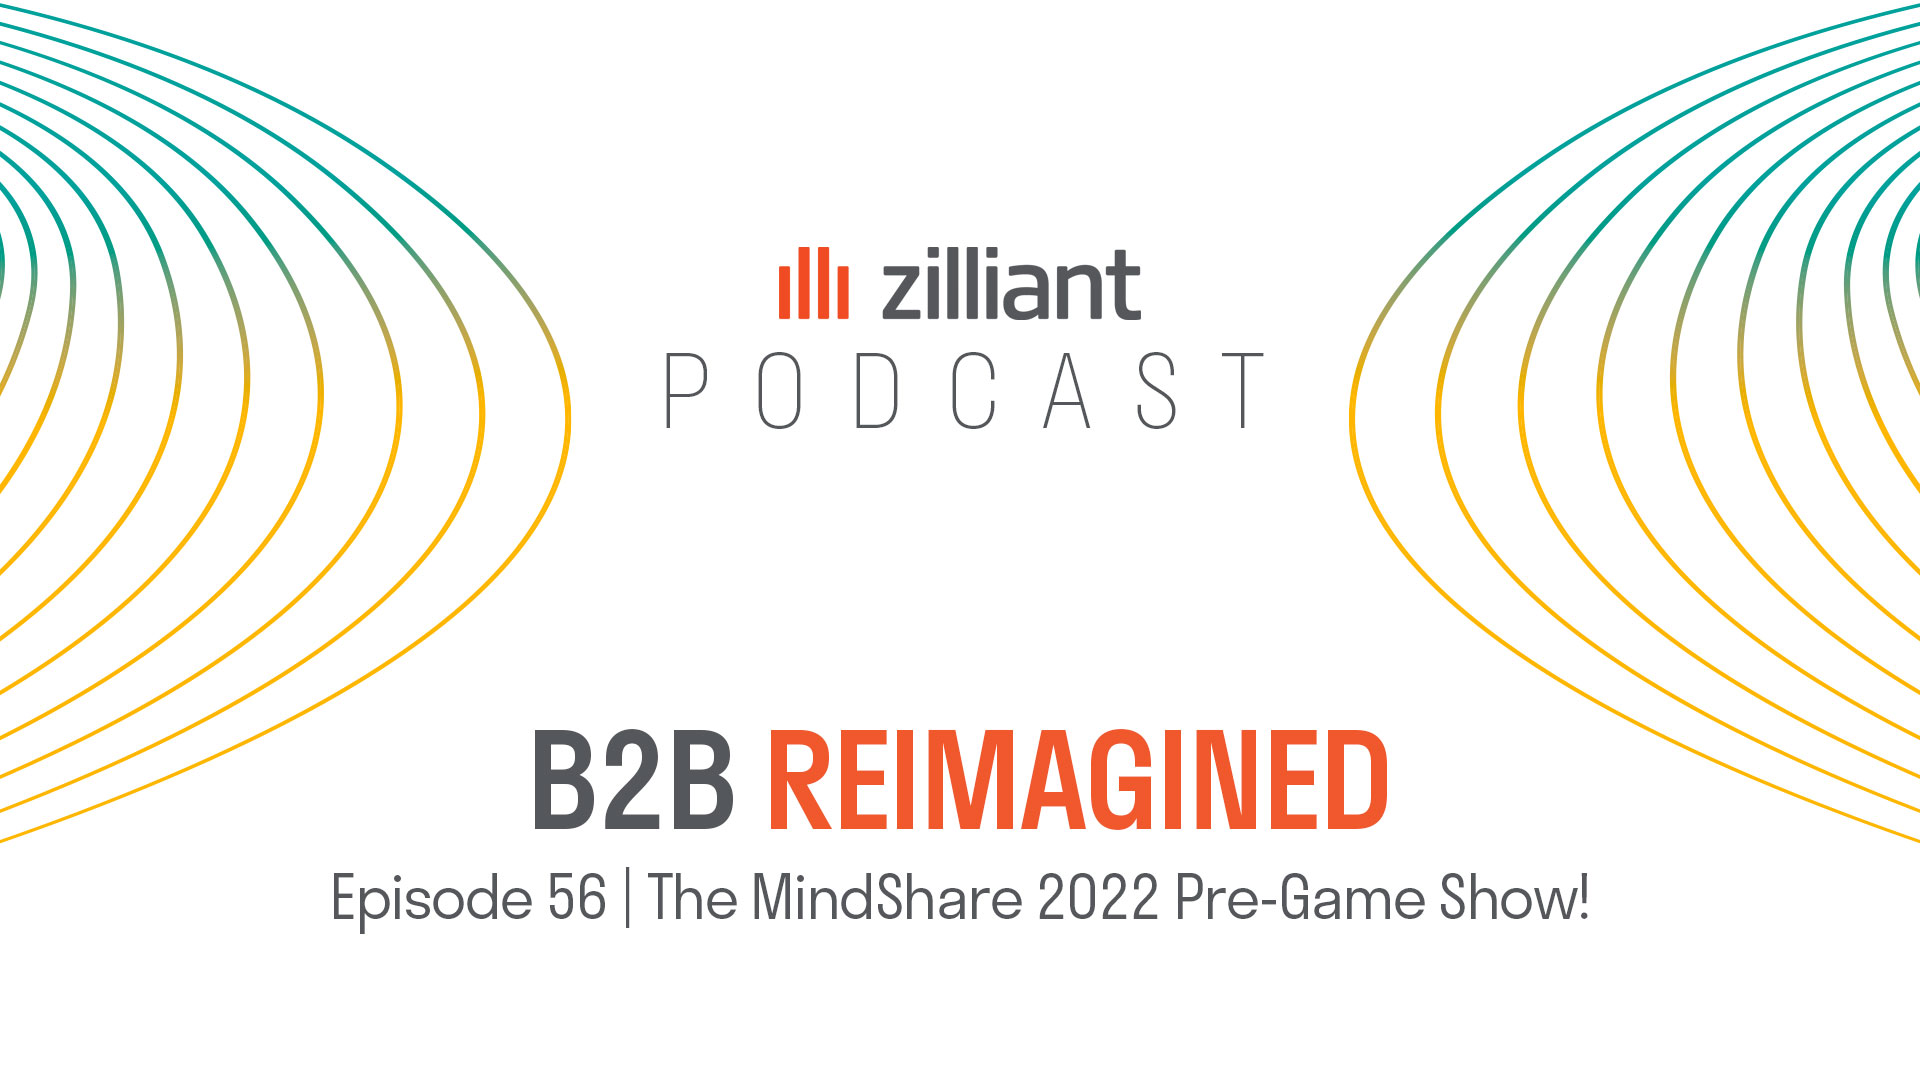 The MindShare 2022 Pre-Game Show!